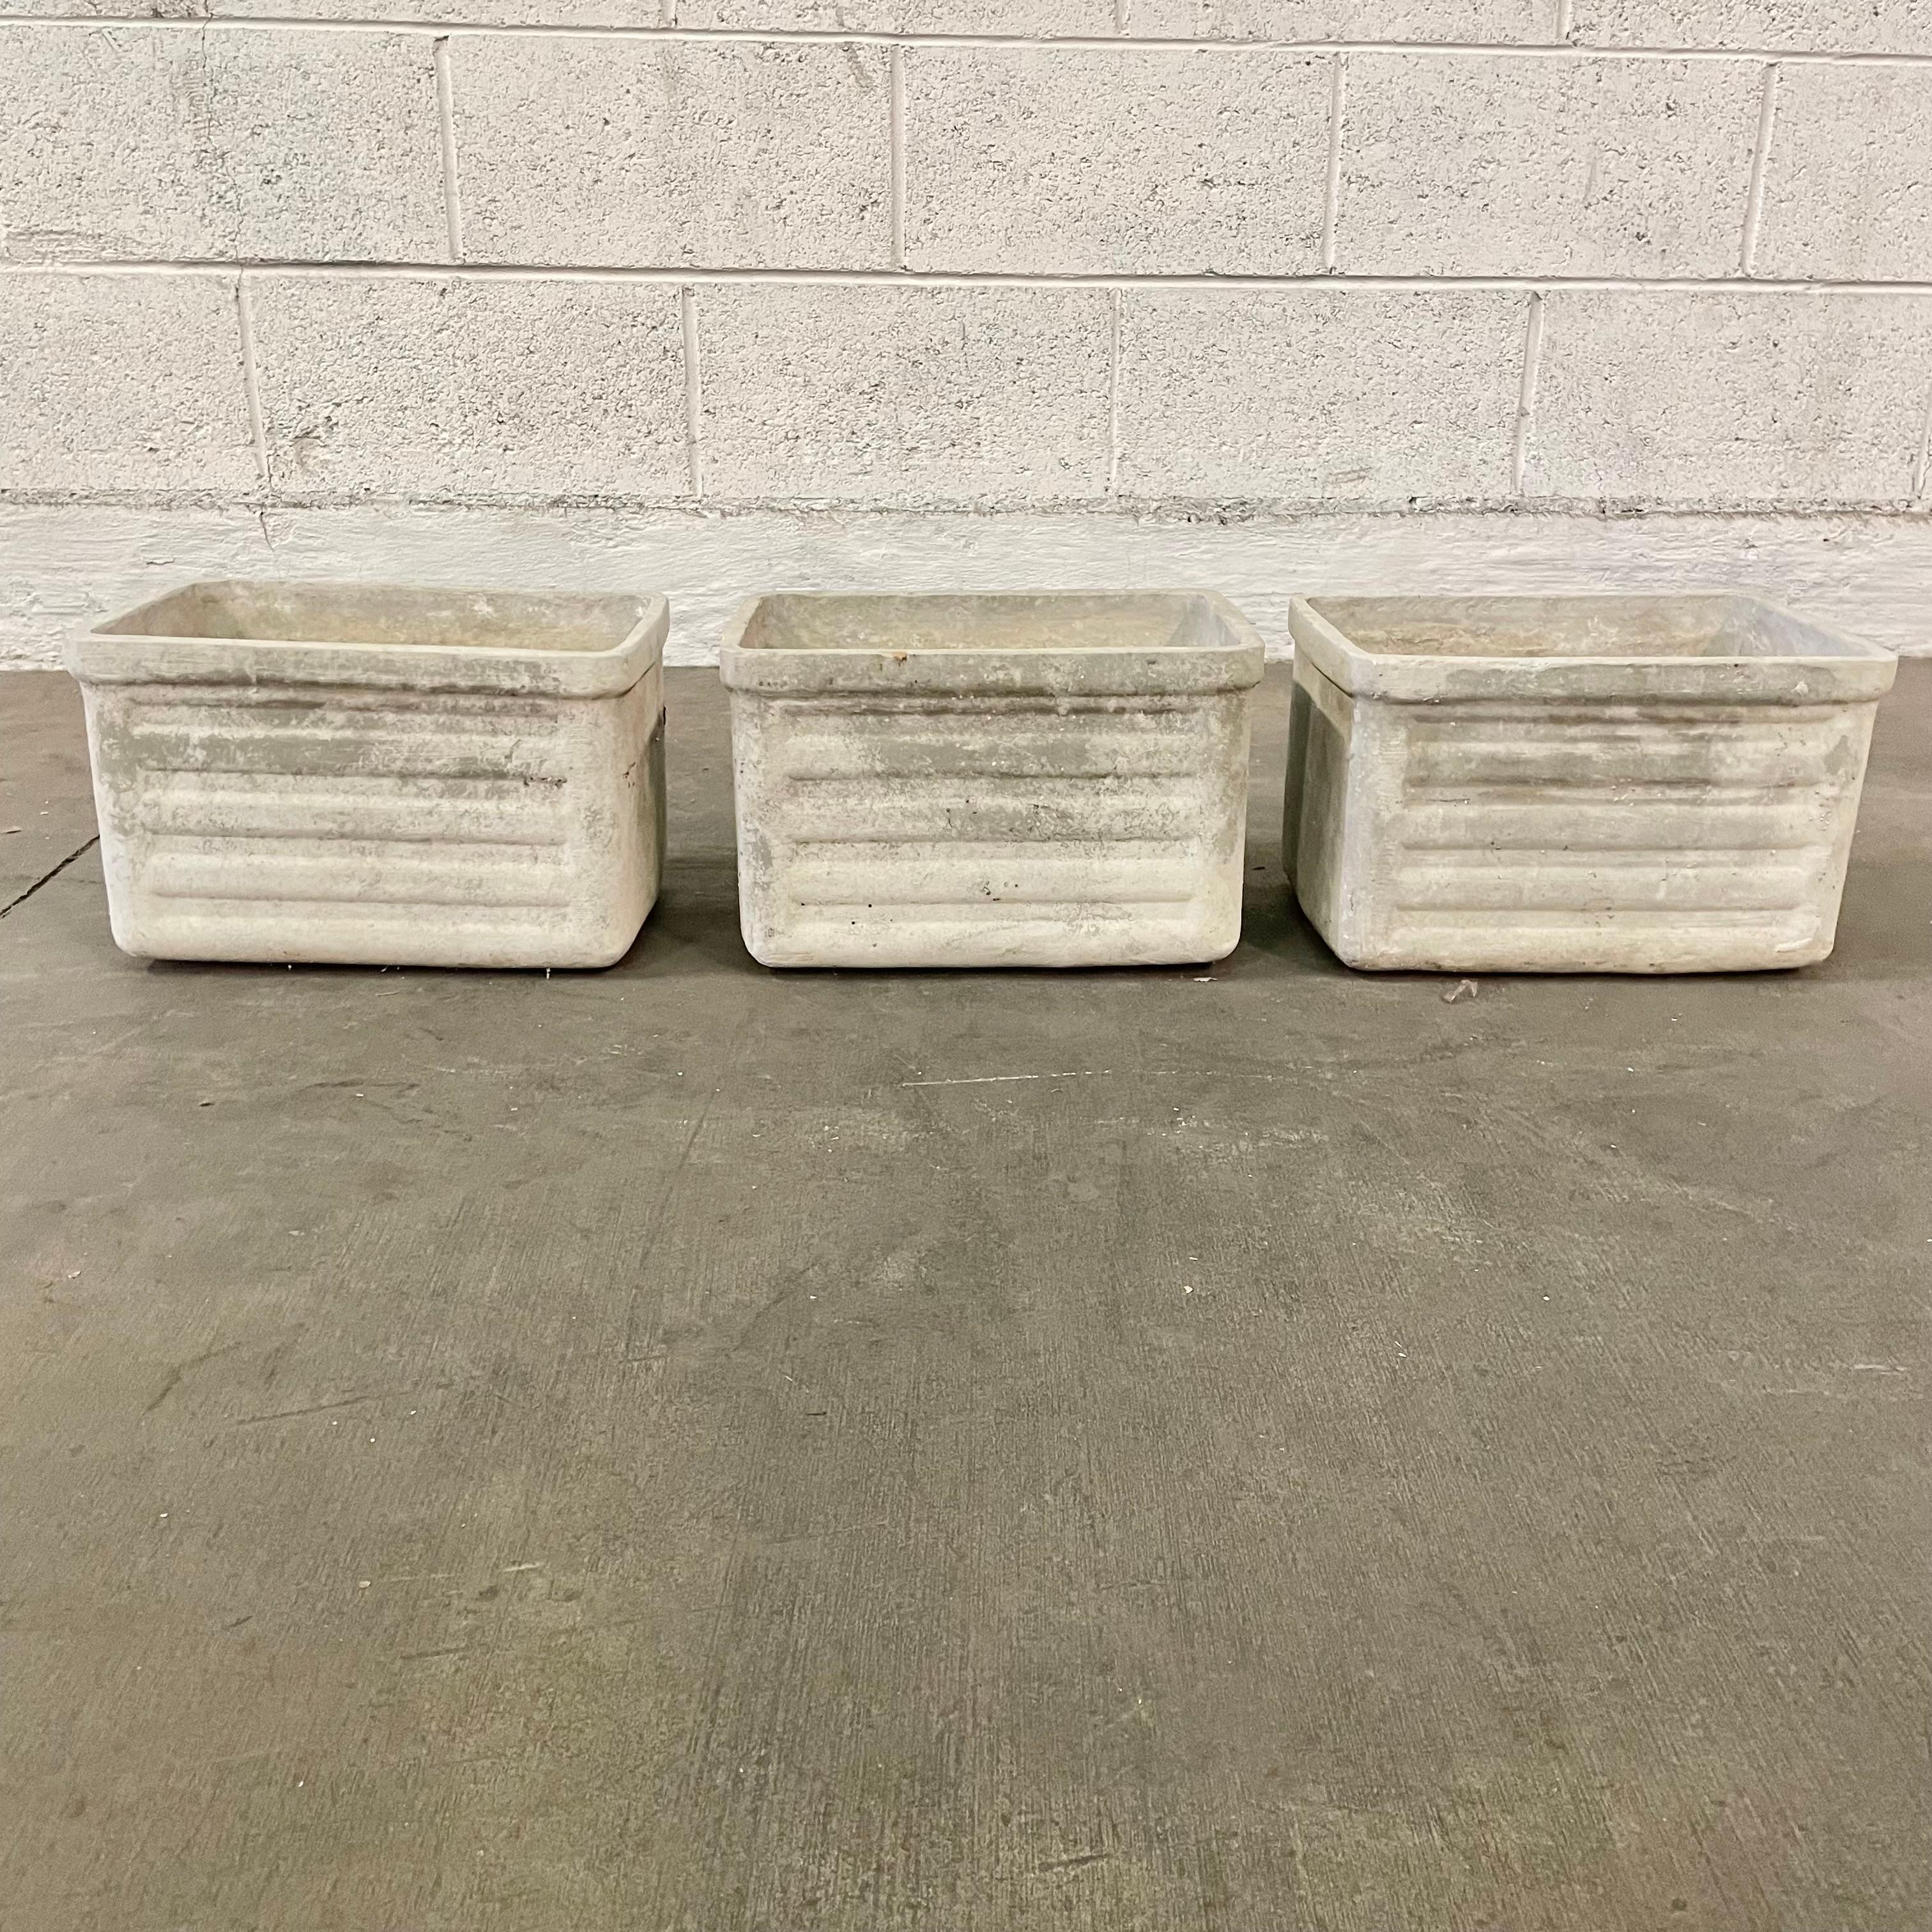 Petite ridged planters by Willy Guhl. Concrete planters in the shape of a rectangle with an upper rim and ridged sides. Great scale. Very good condition with similar patina on all 3 available. Priced individually. 

